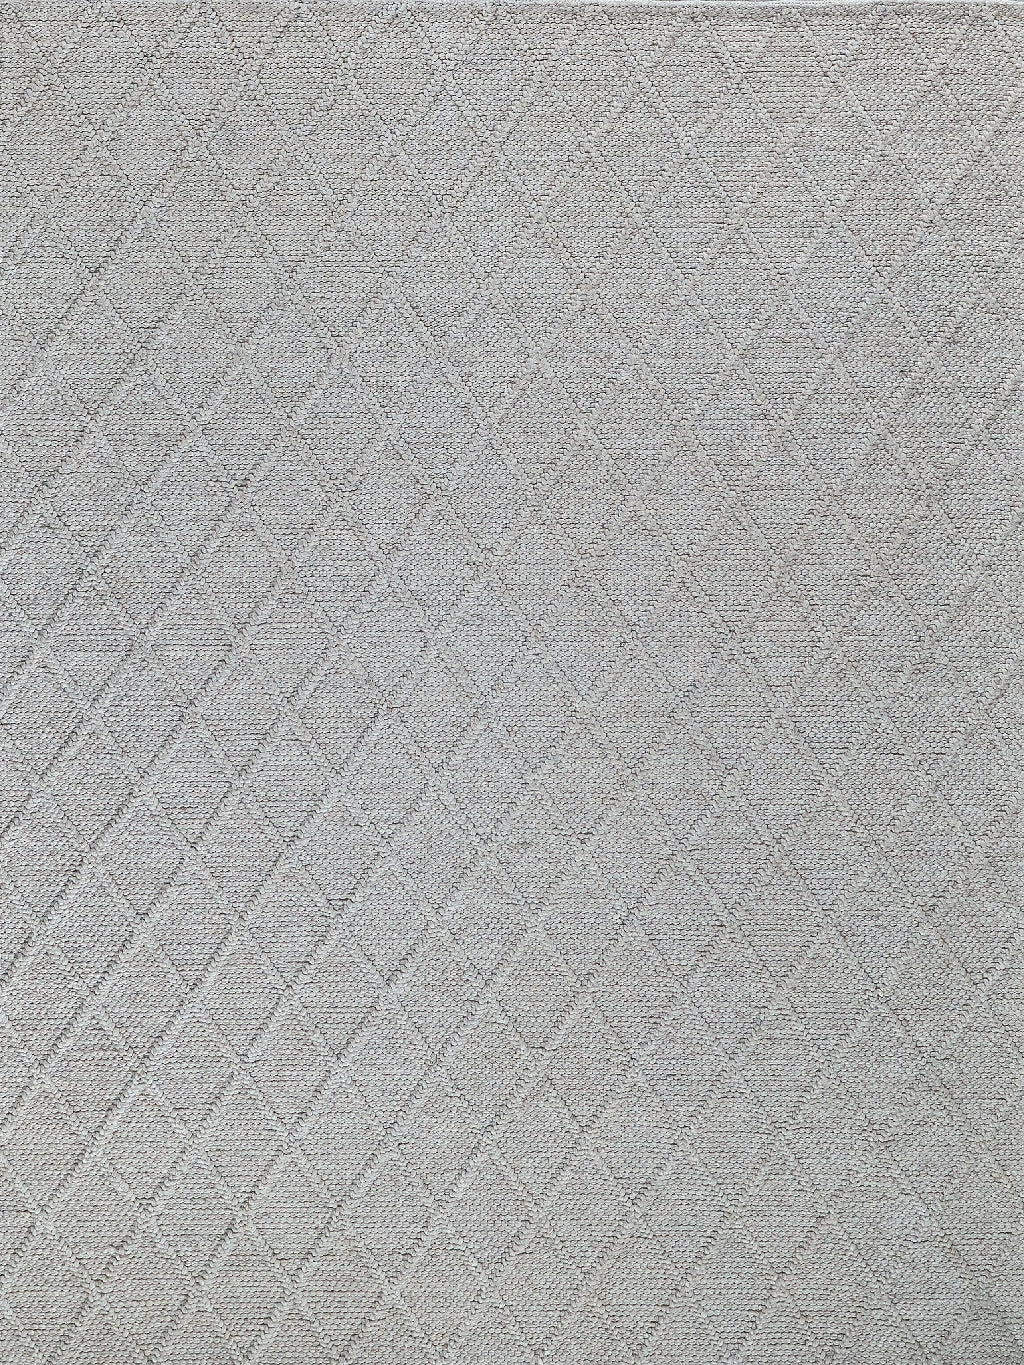 Exquisite Rugs Brentwood 4715 Silver Area Rug